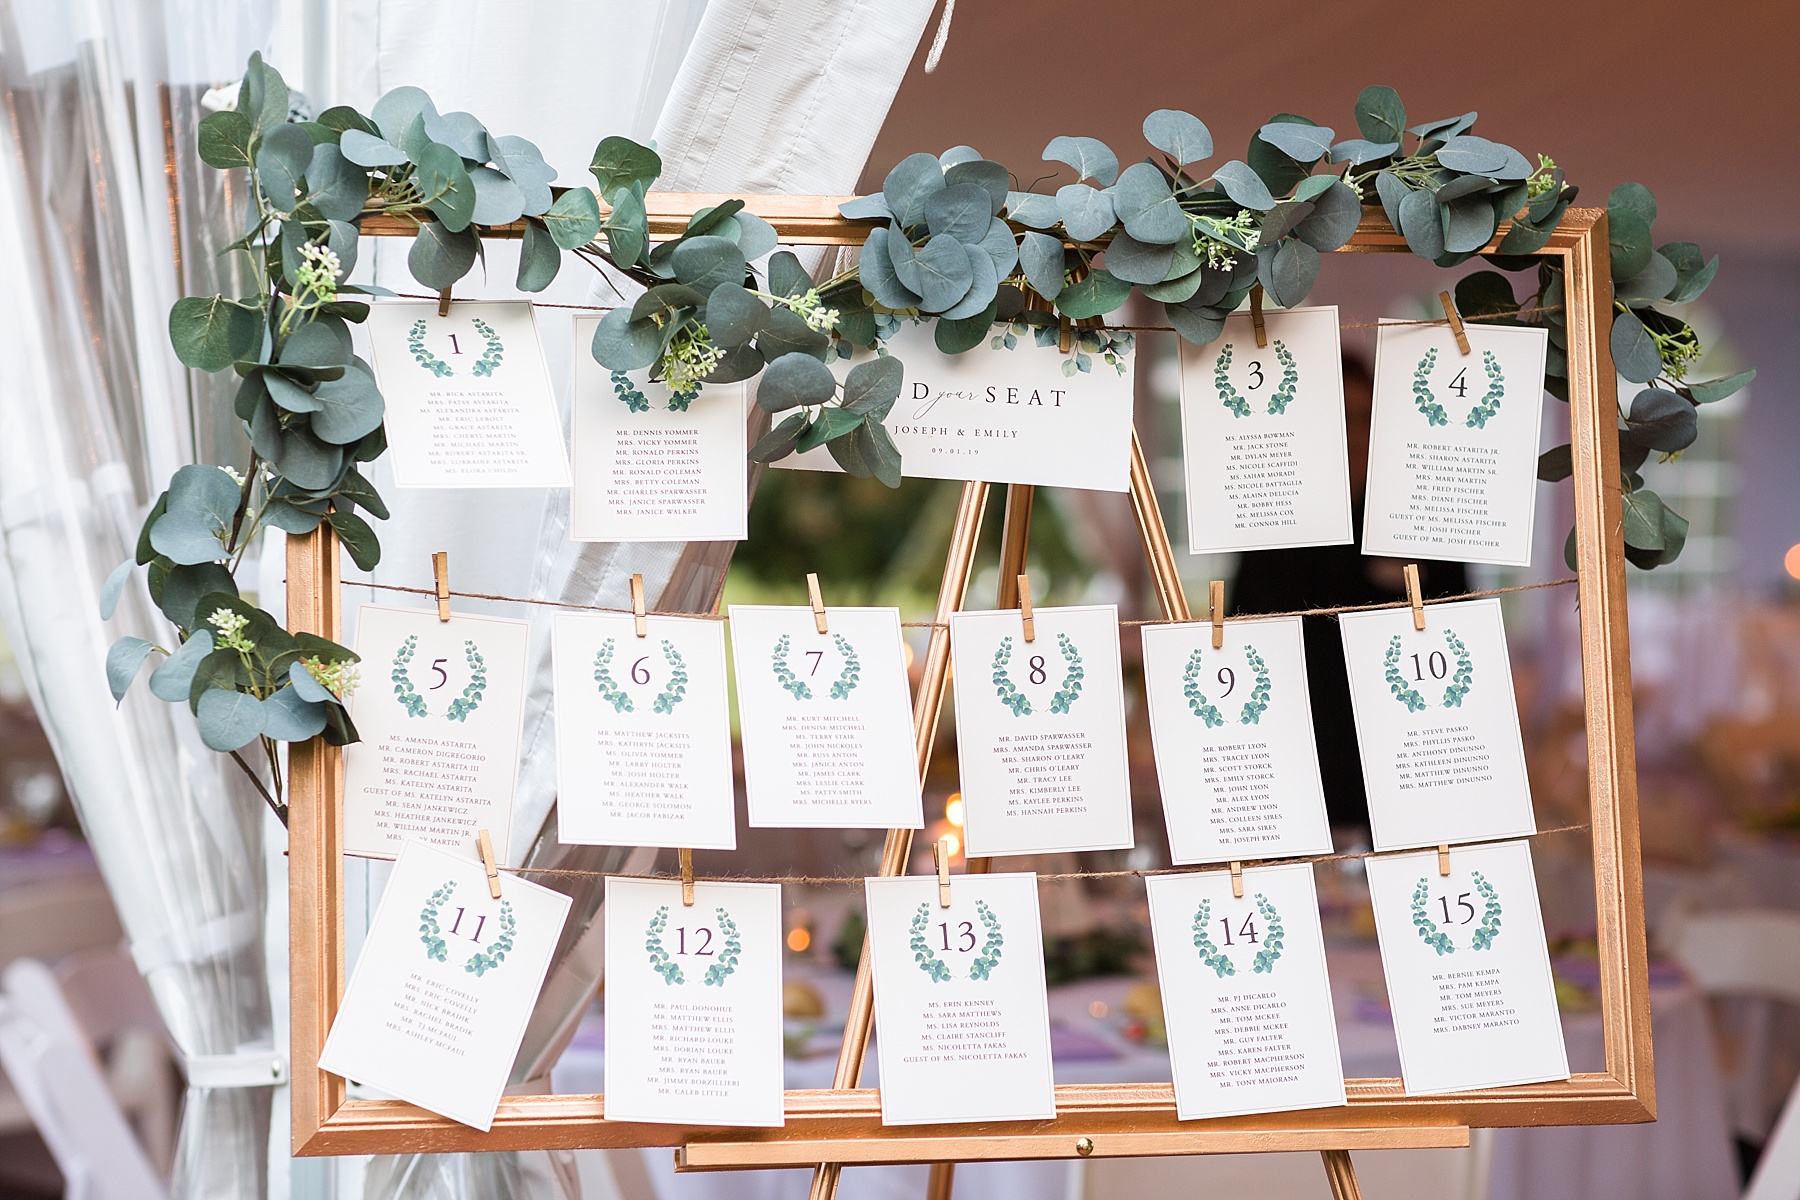 seating chart for Swan Harbor Farm wedding day reception with Alexandra Mandato Photography